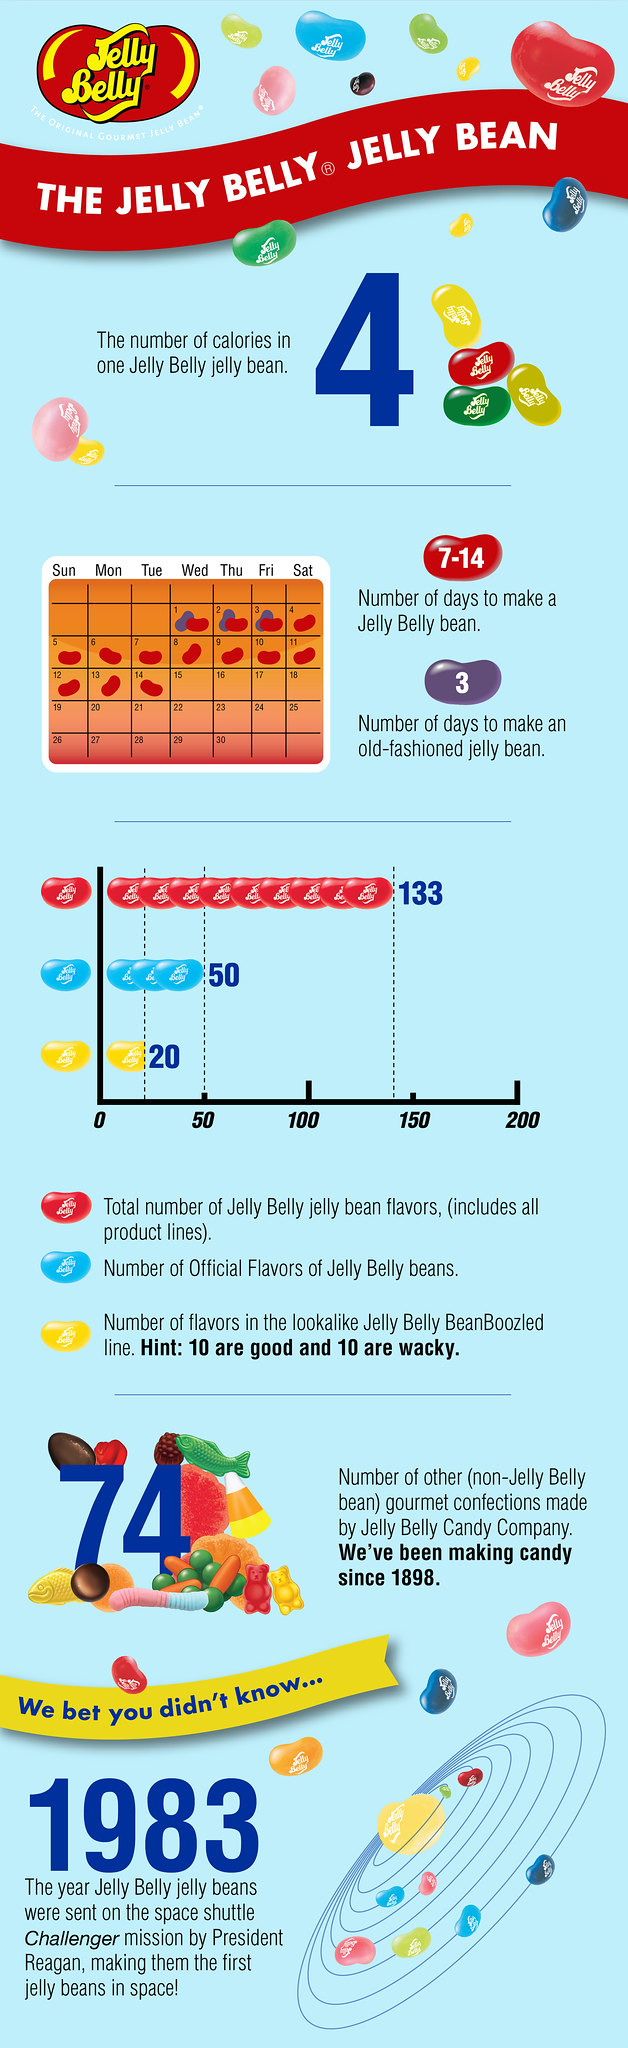 Jelly Belly jelly beans infographic